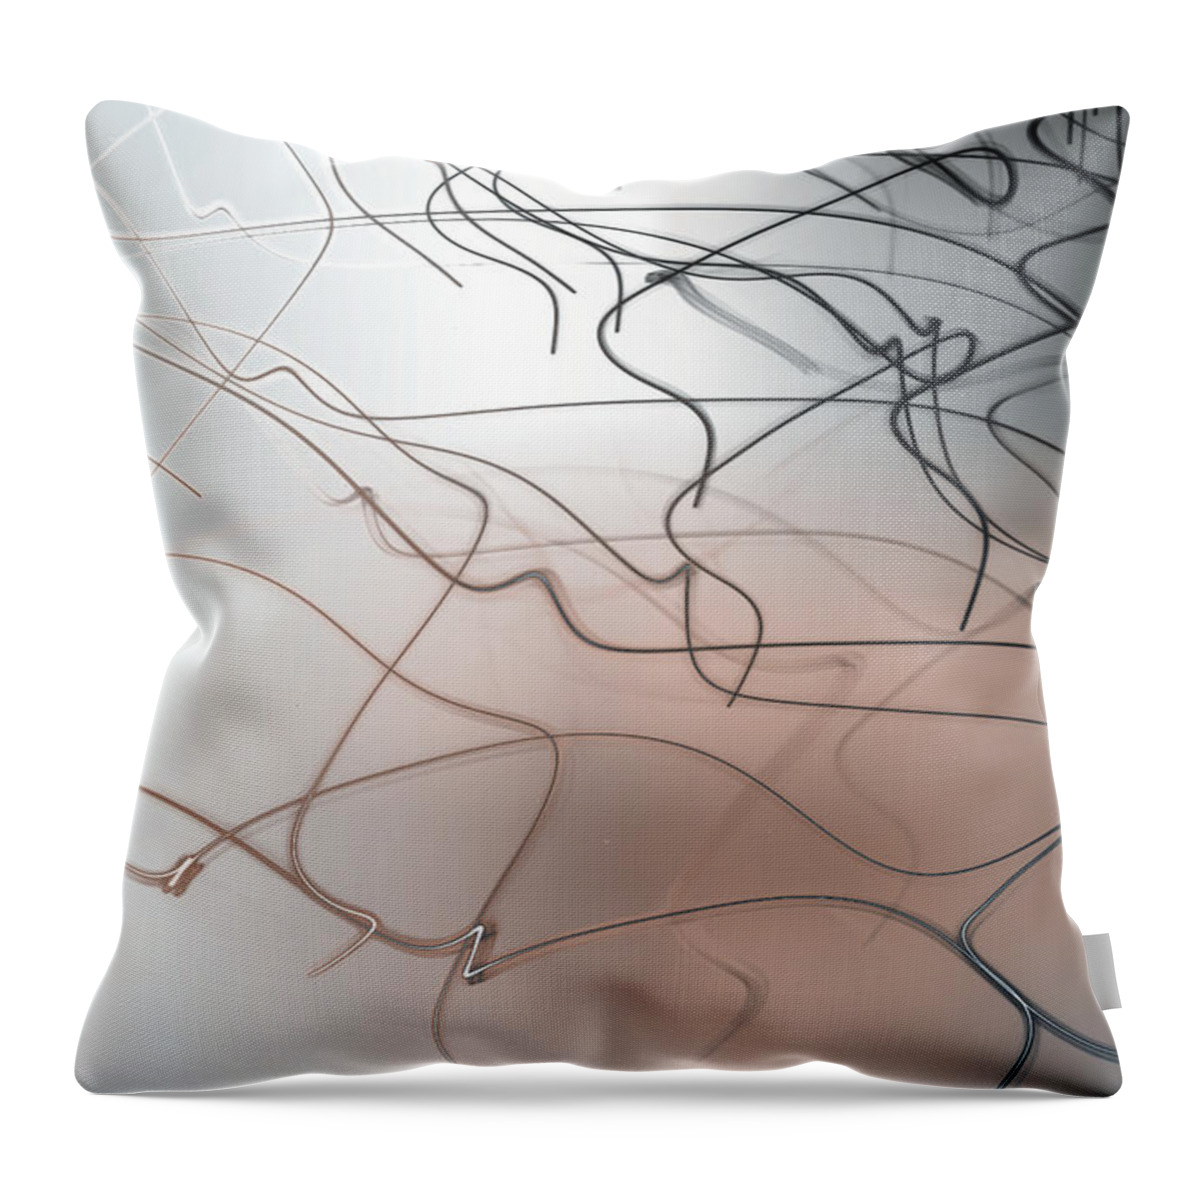 Eleventh Throw Pillow featuring the photograph Img_8301 by John Emmett